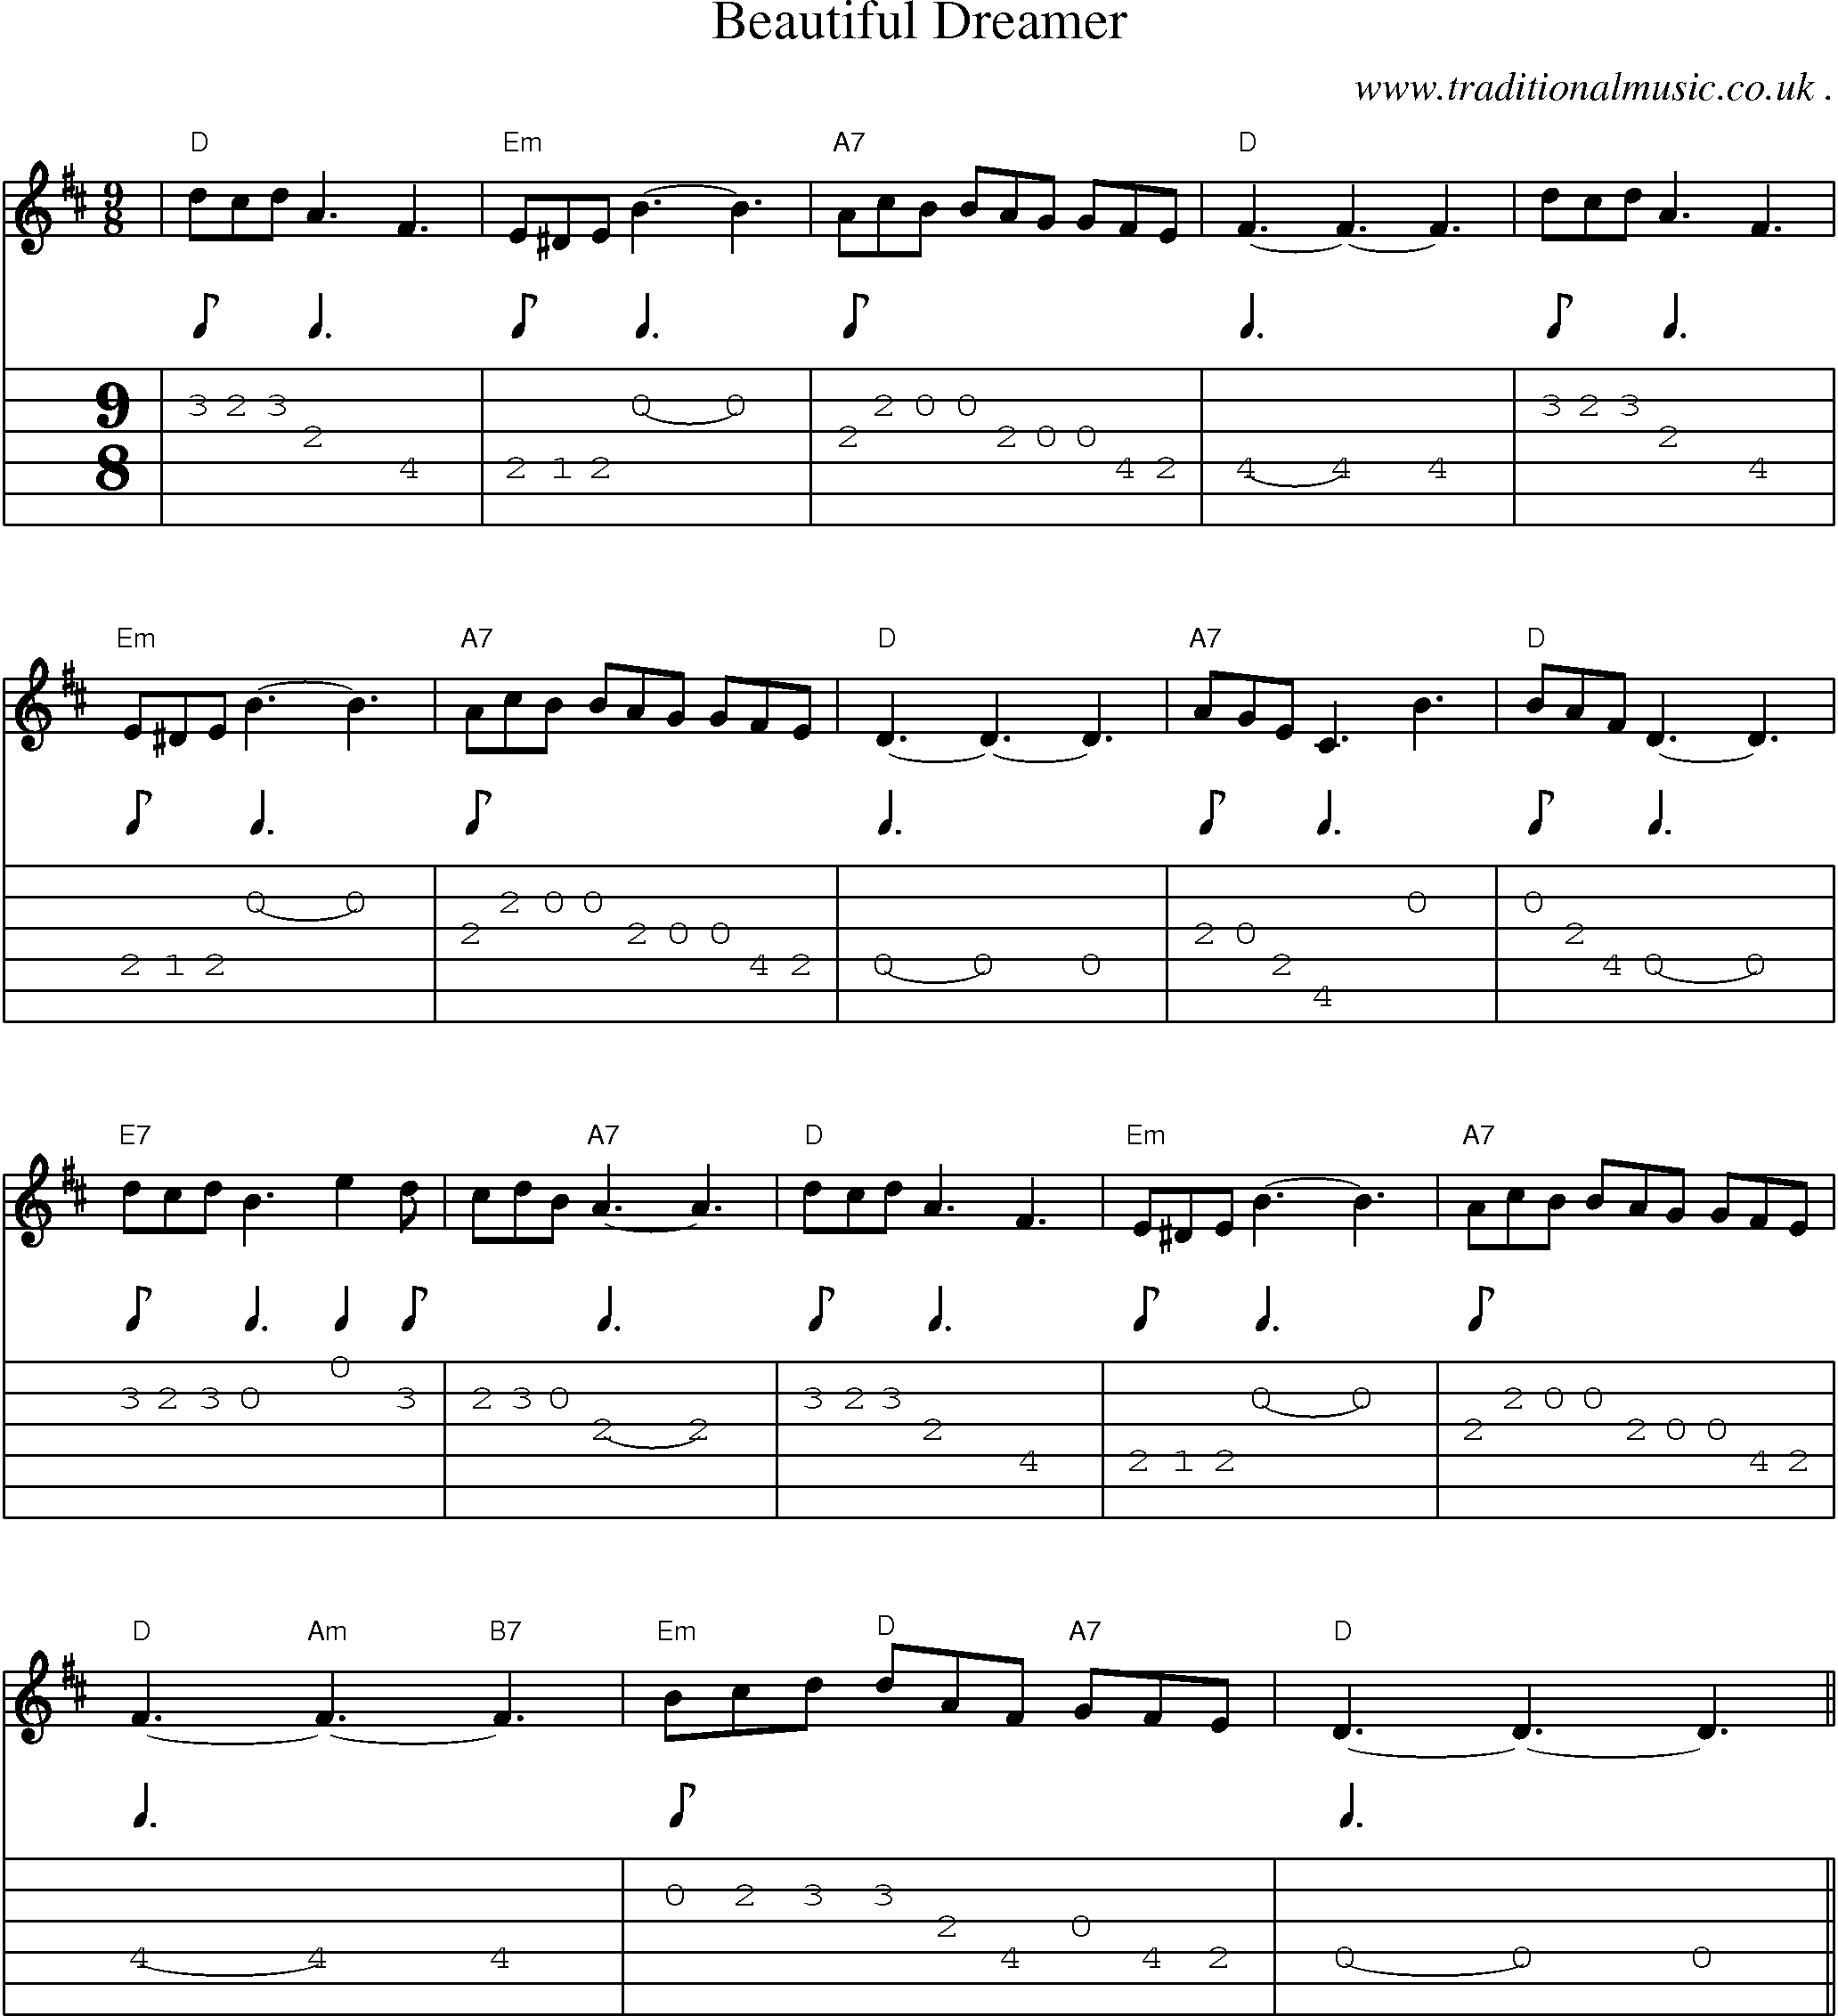 Music Score and Guitar Tabs for Beautiful Dreamer